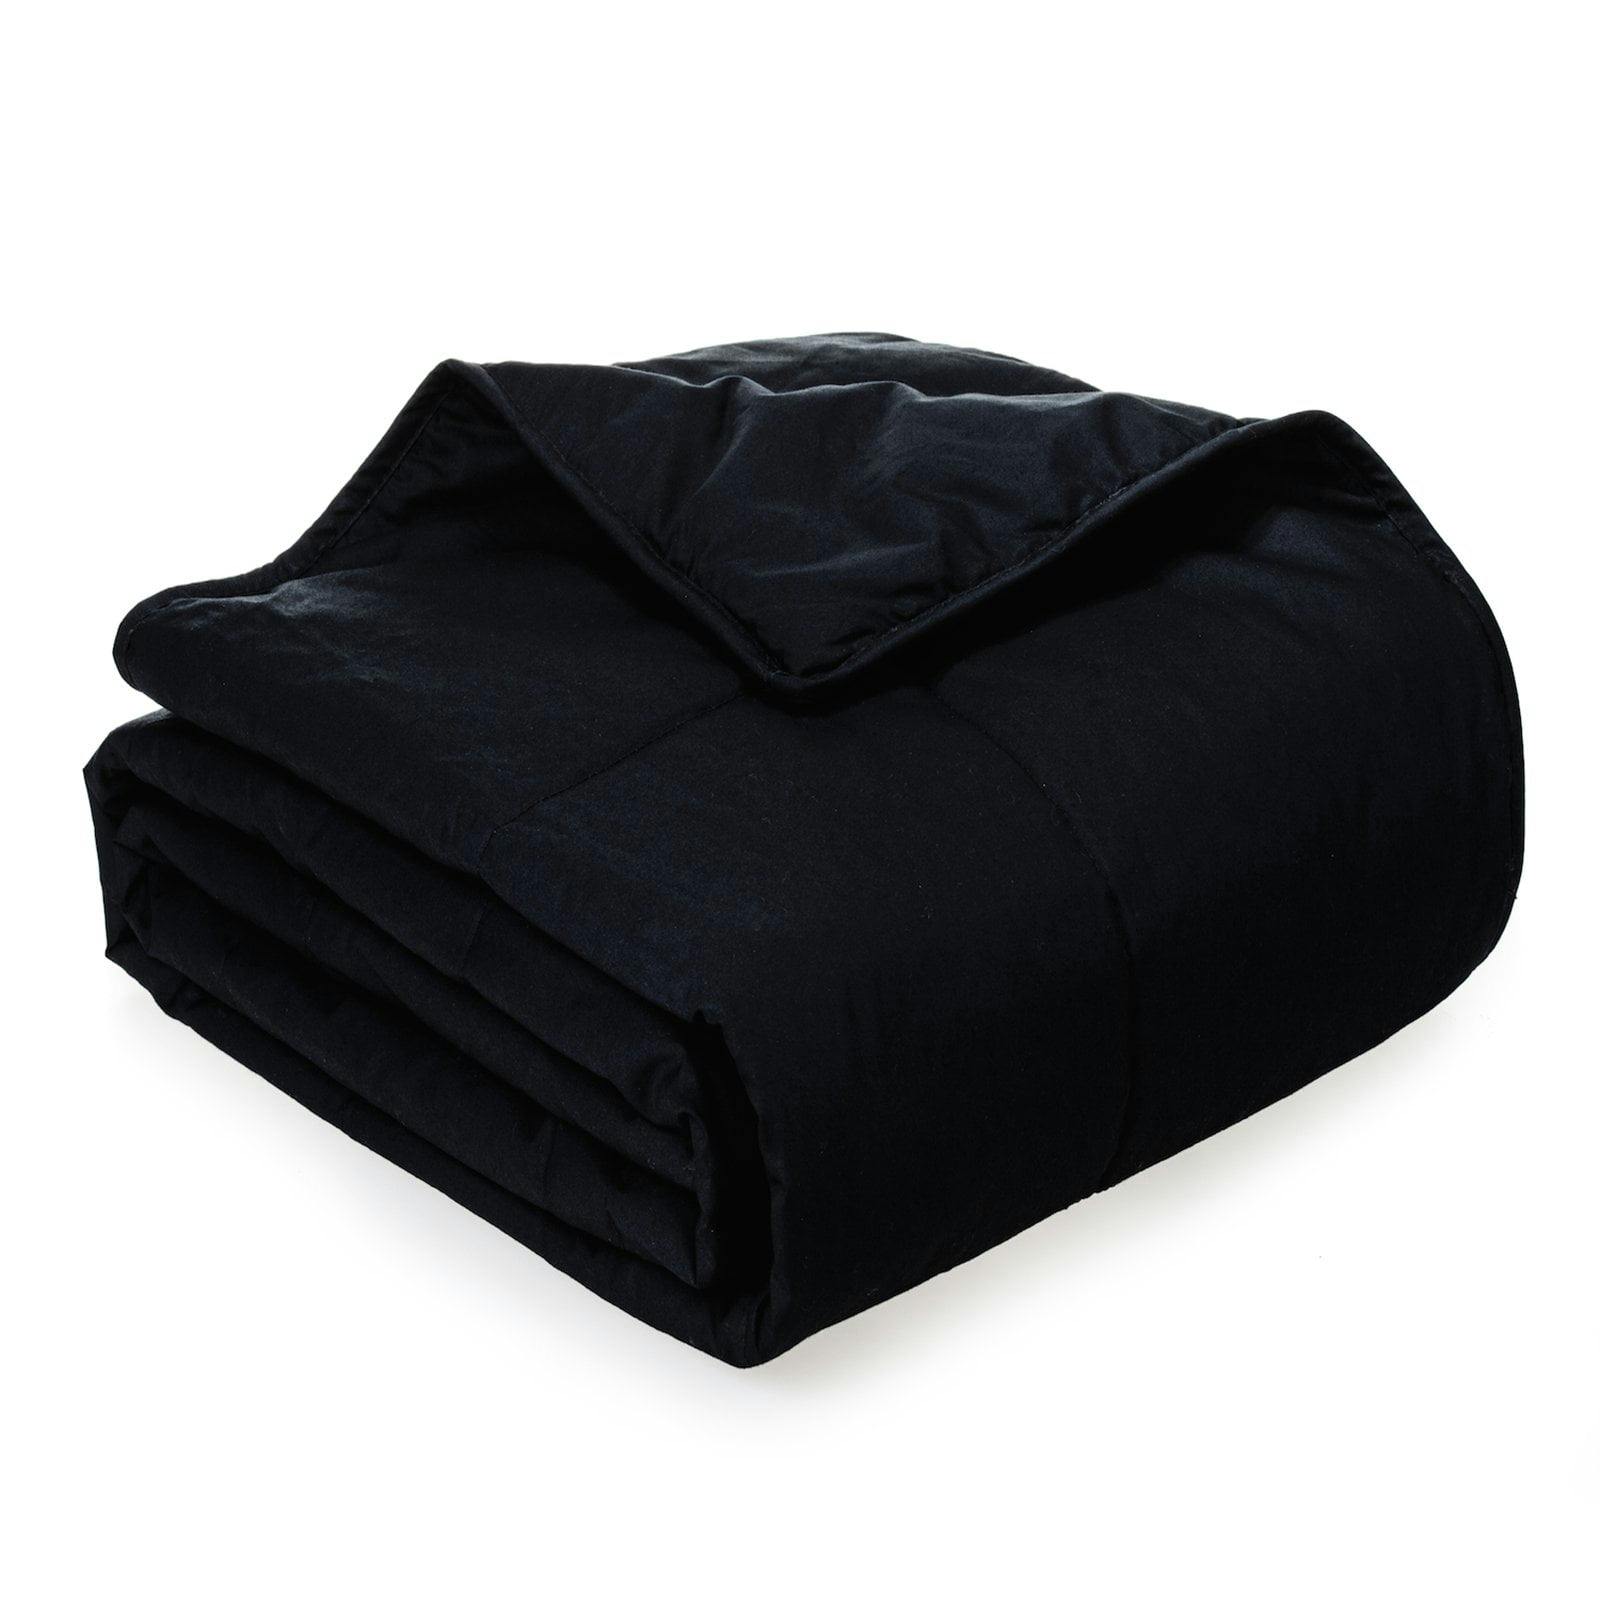 All-Season Traditional Full Cotton Breathable Blanket